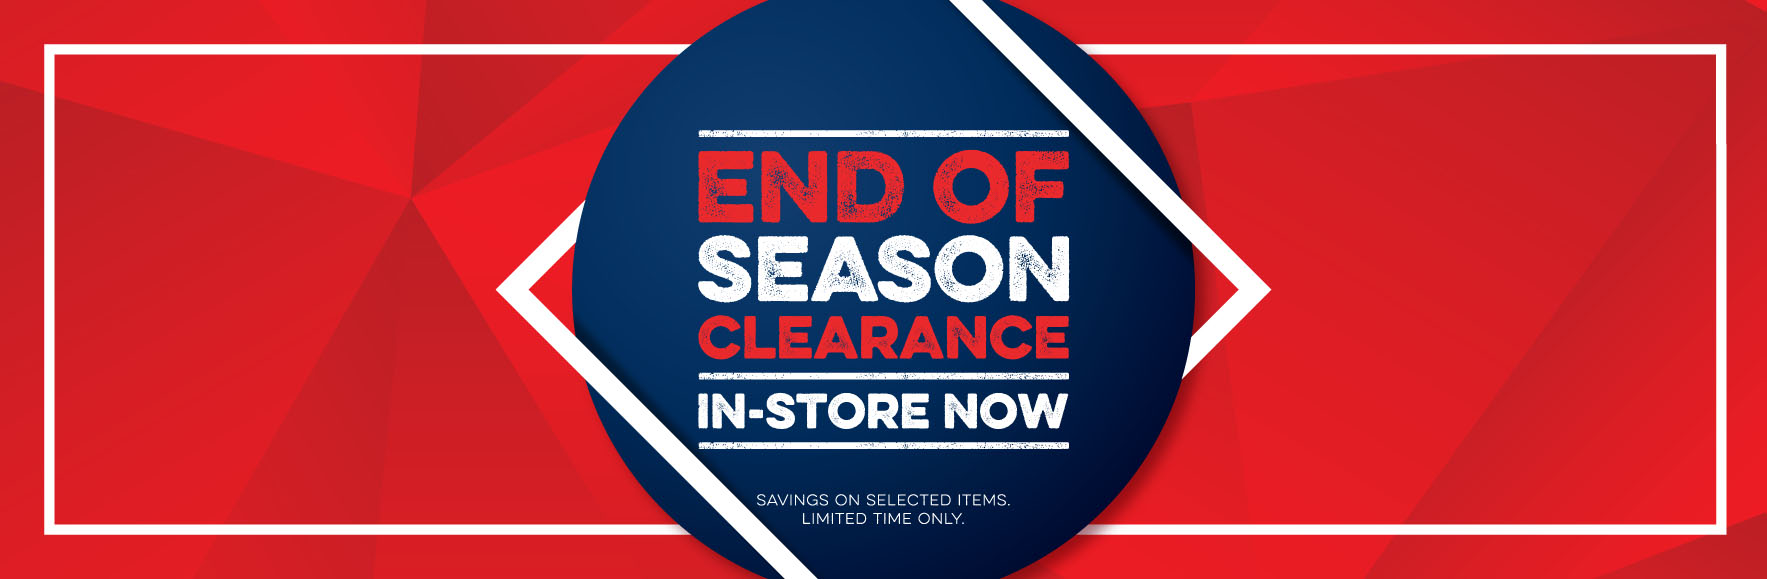 End of season clearance in-store now